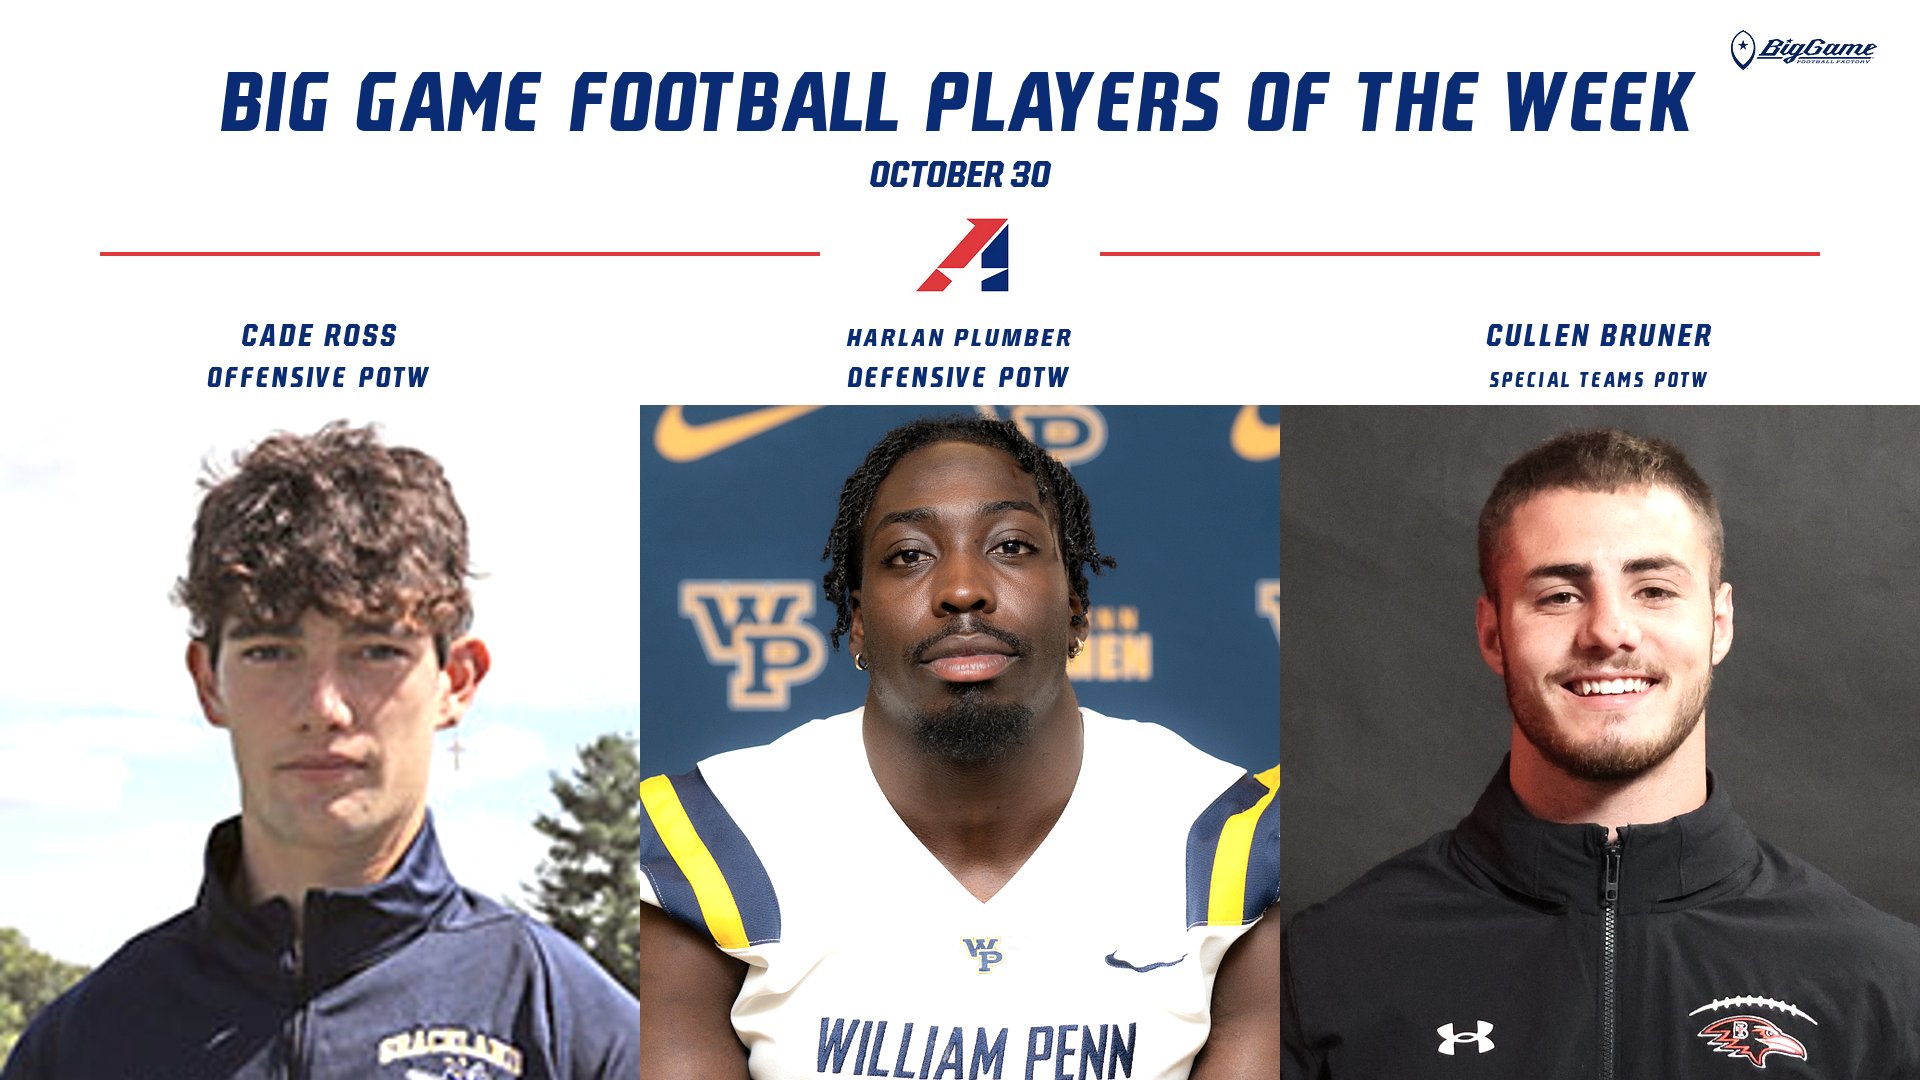 Big Game Football Players of the Week Announced - October 30